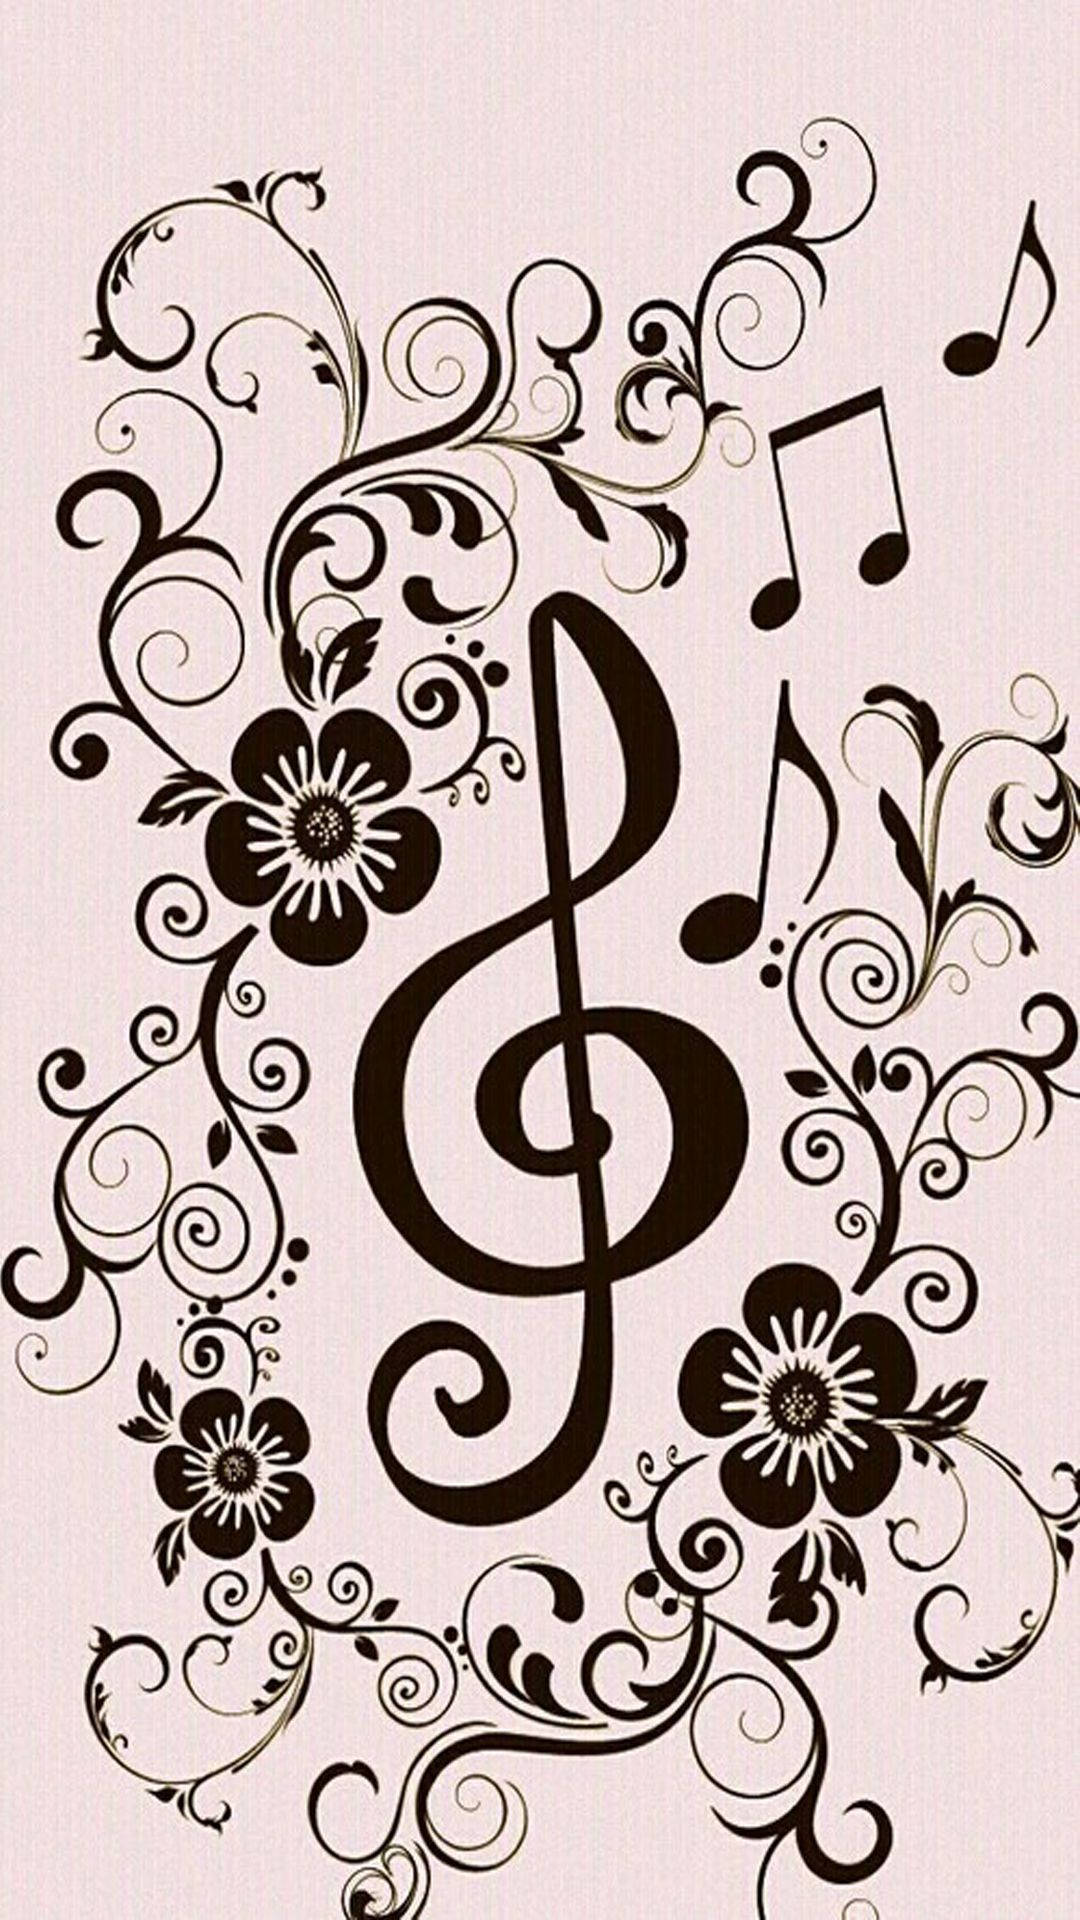 Cute Music Notes Floral Aesthetic Background